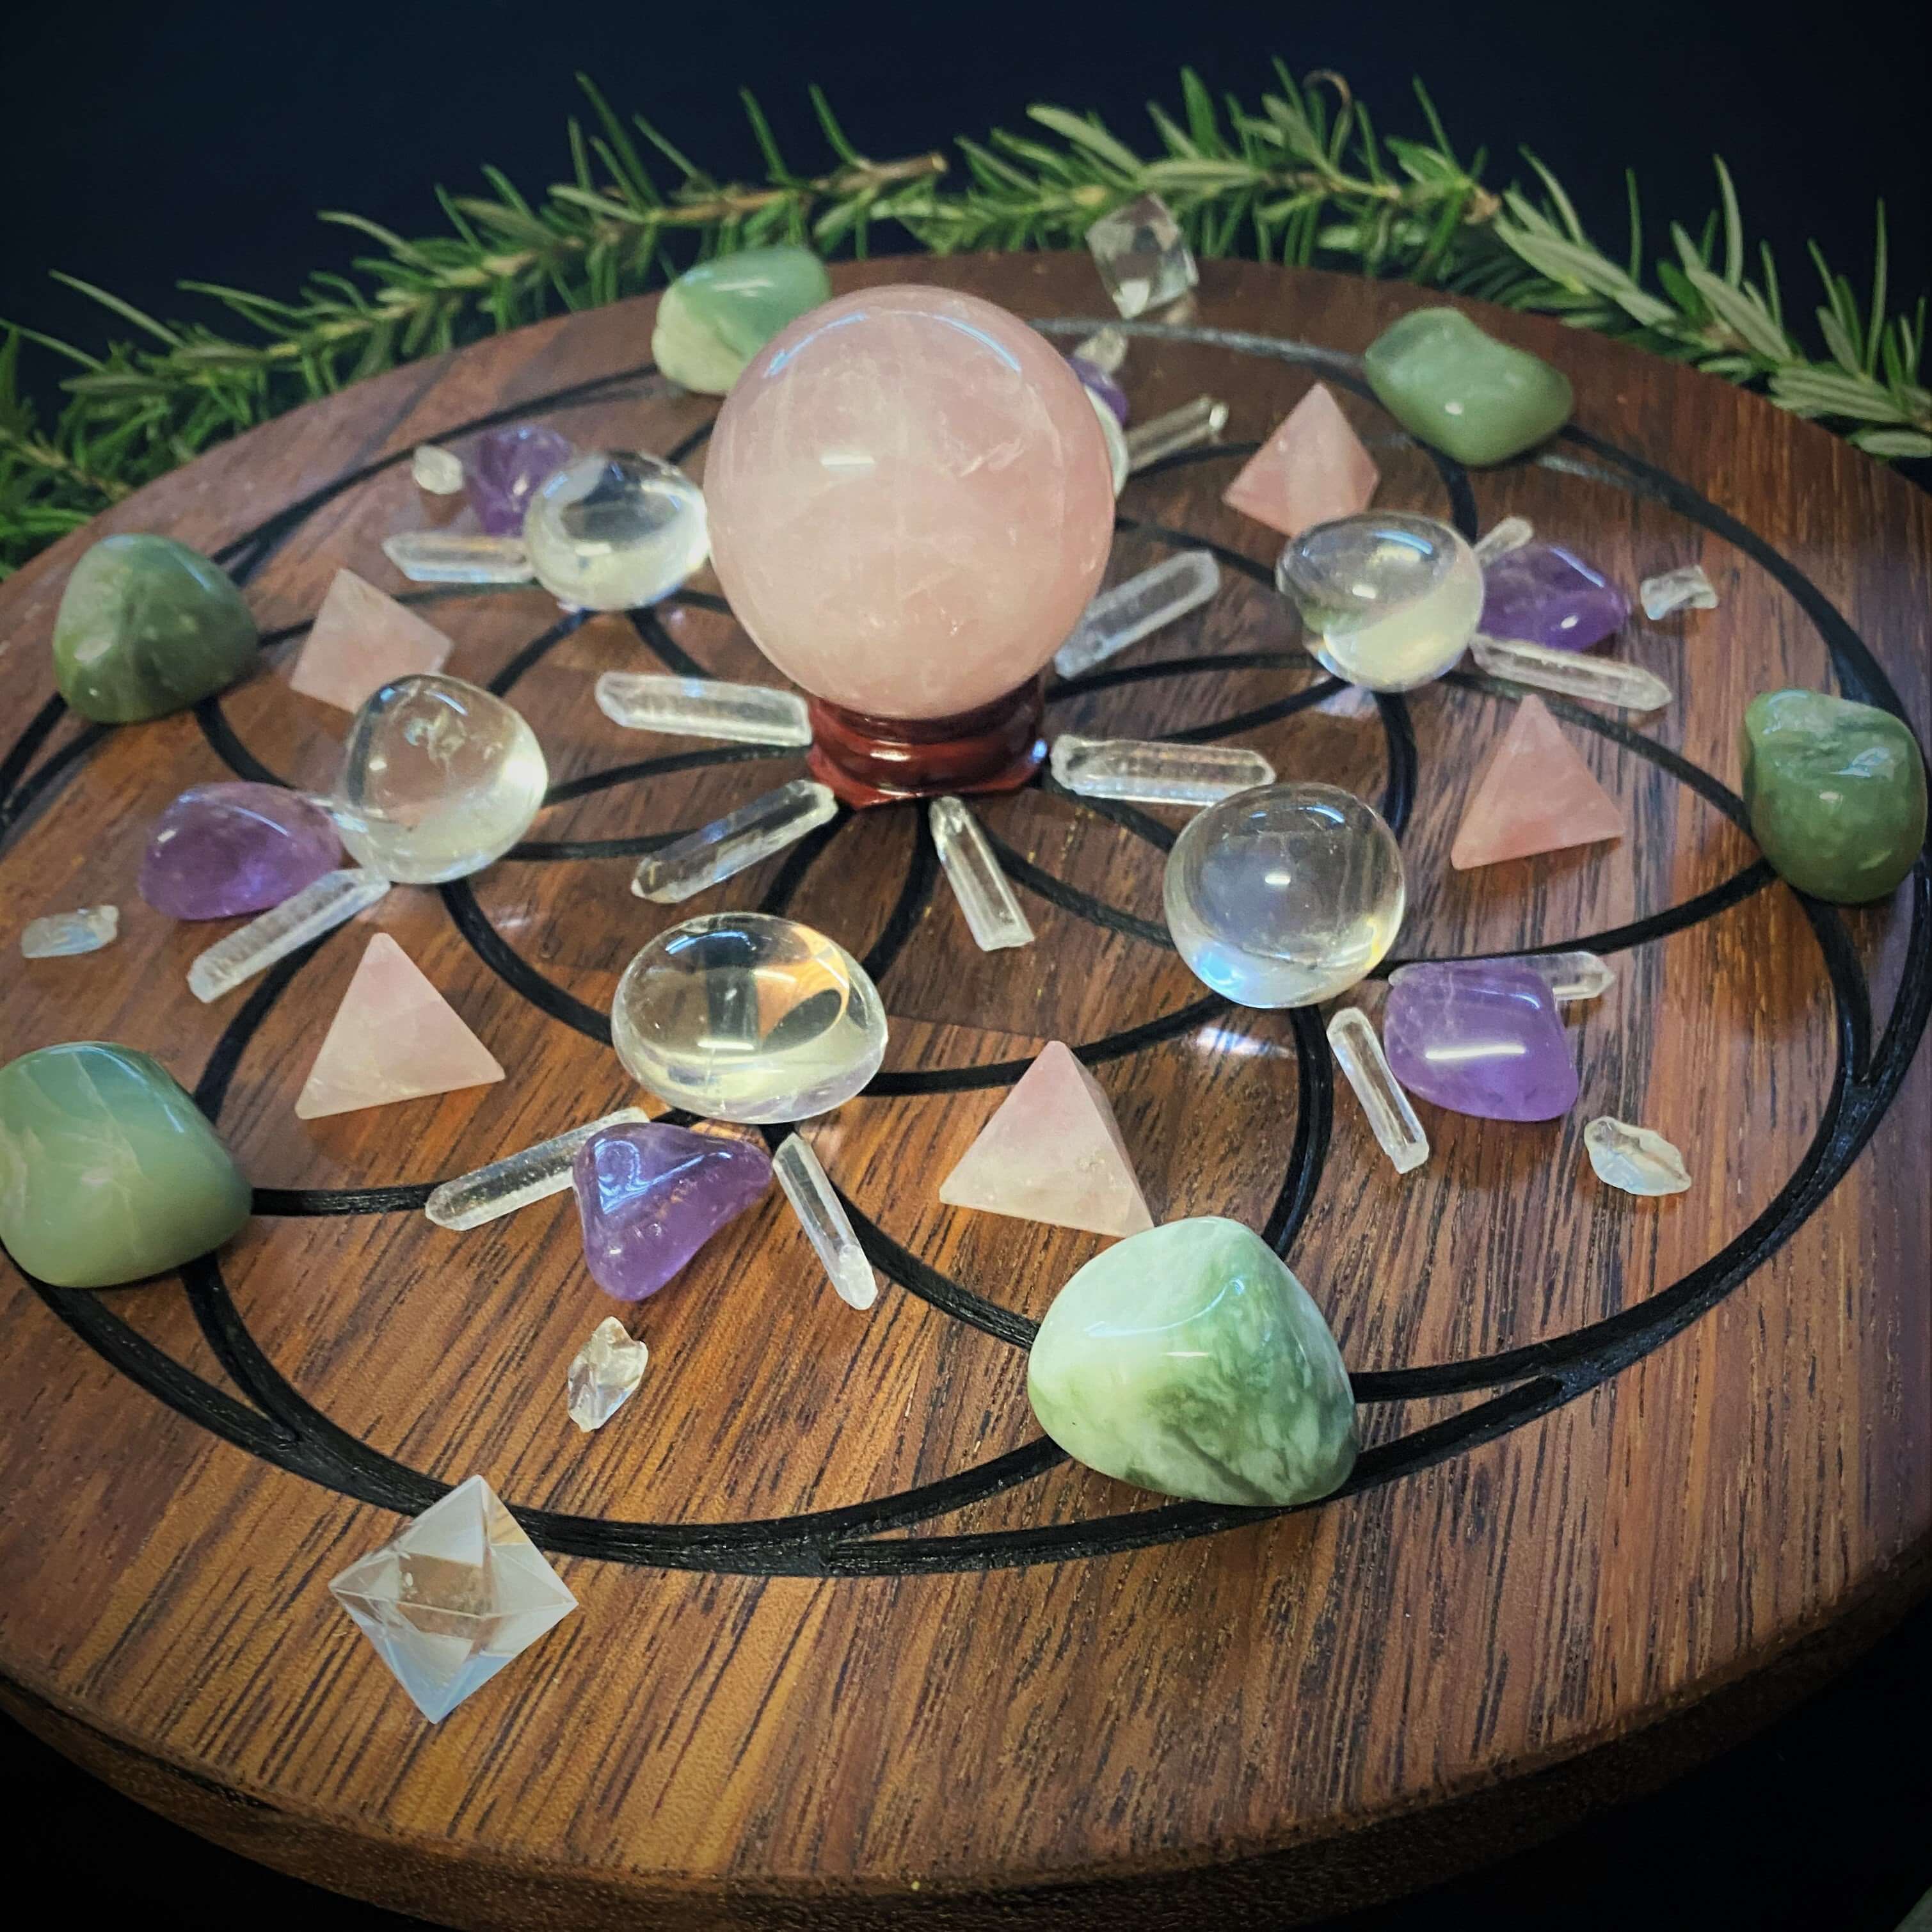 5 Healing Crystals For Beginners  Crystals healing grids, Crystals,  Crystal healing chart